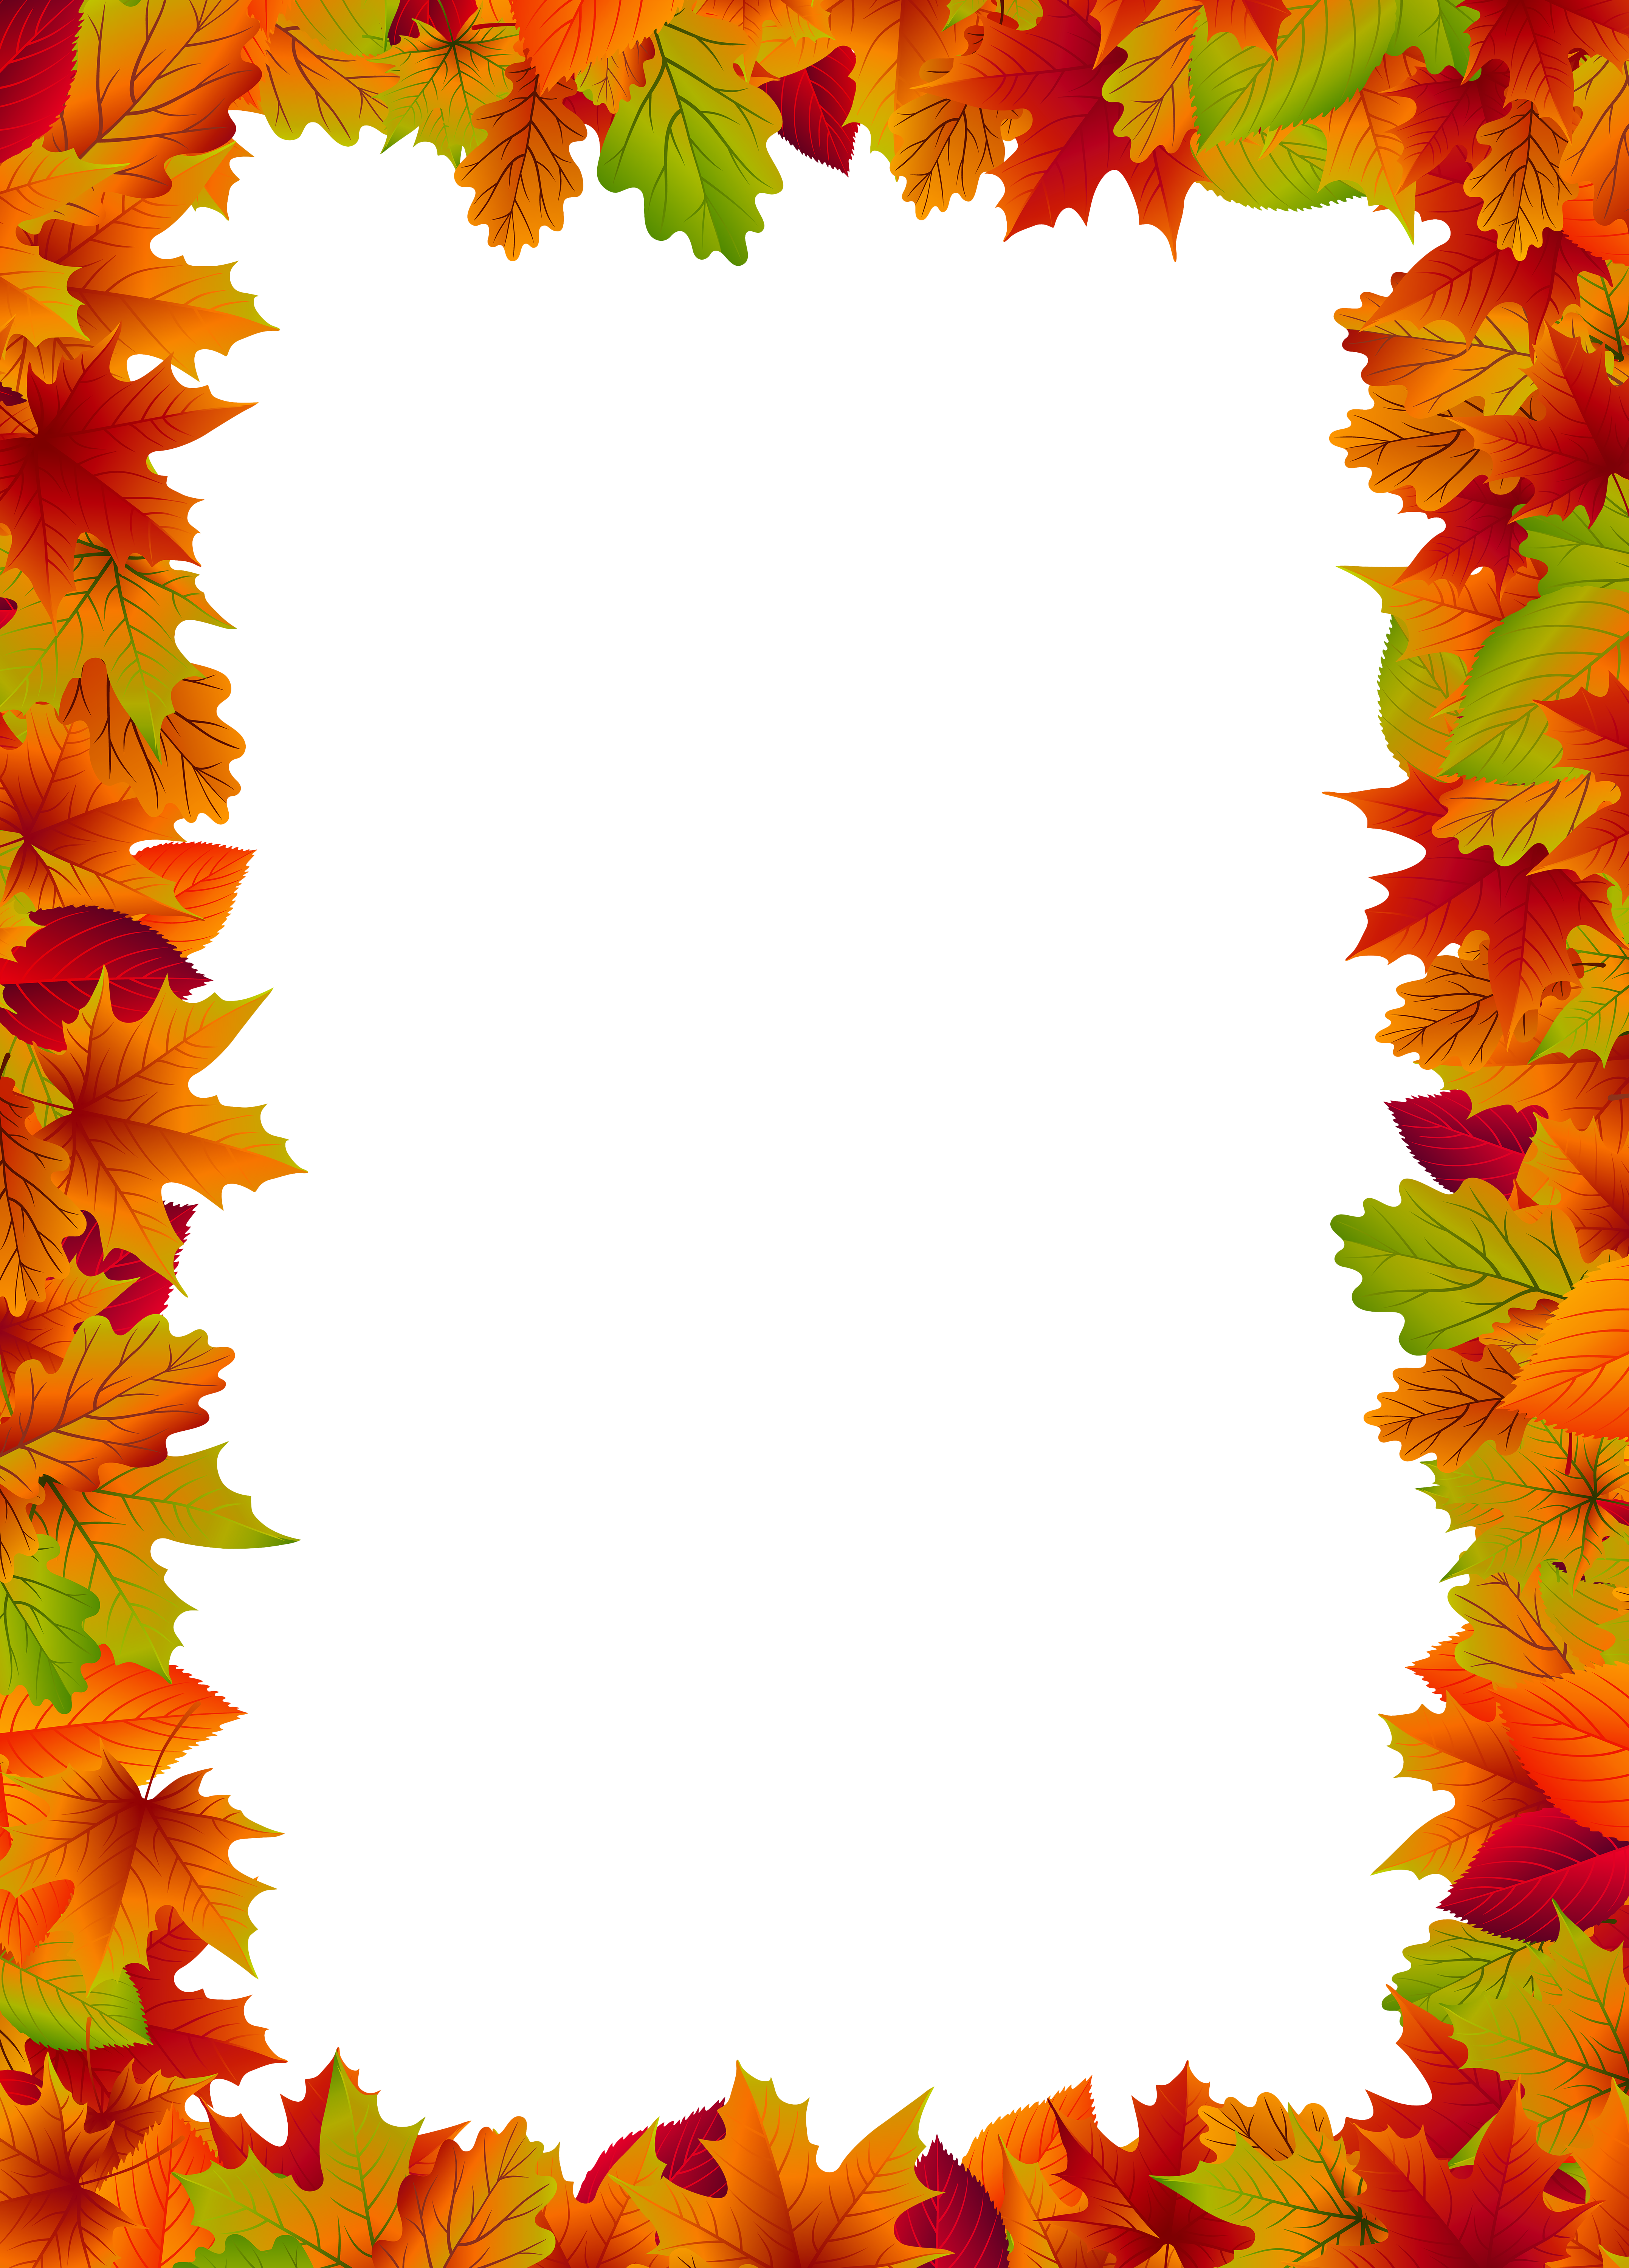 Fall Border Frame Png Clip Art Image Gallery Yopriceville High Quality Images And Transparent Png Free Clipart